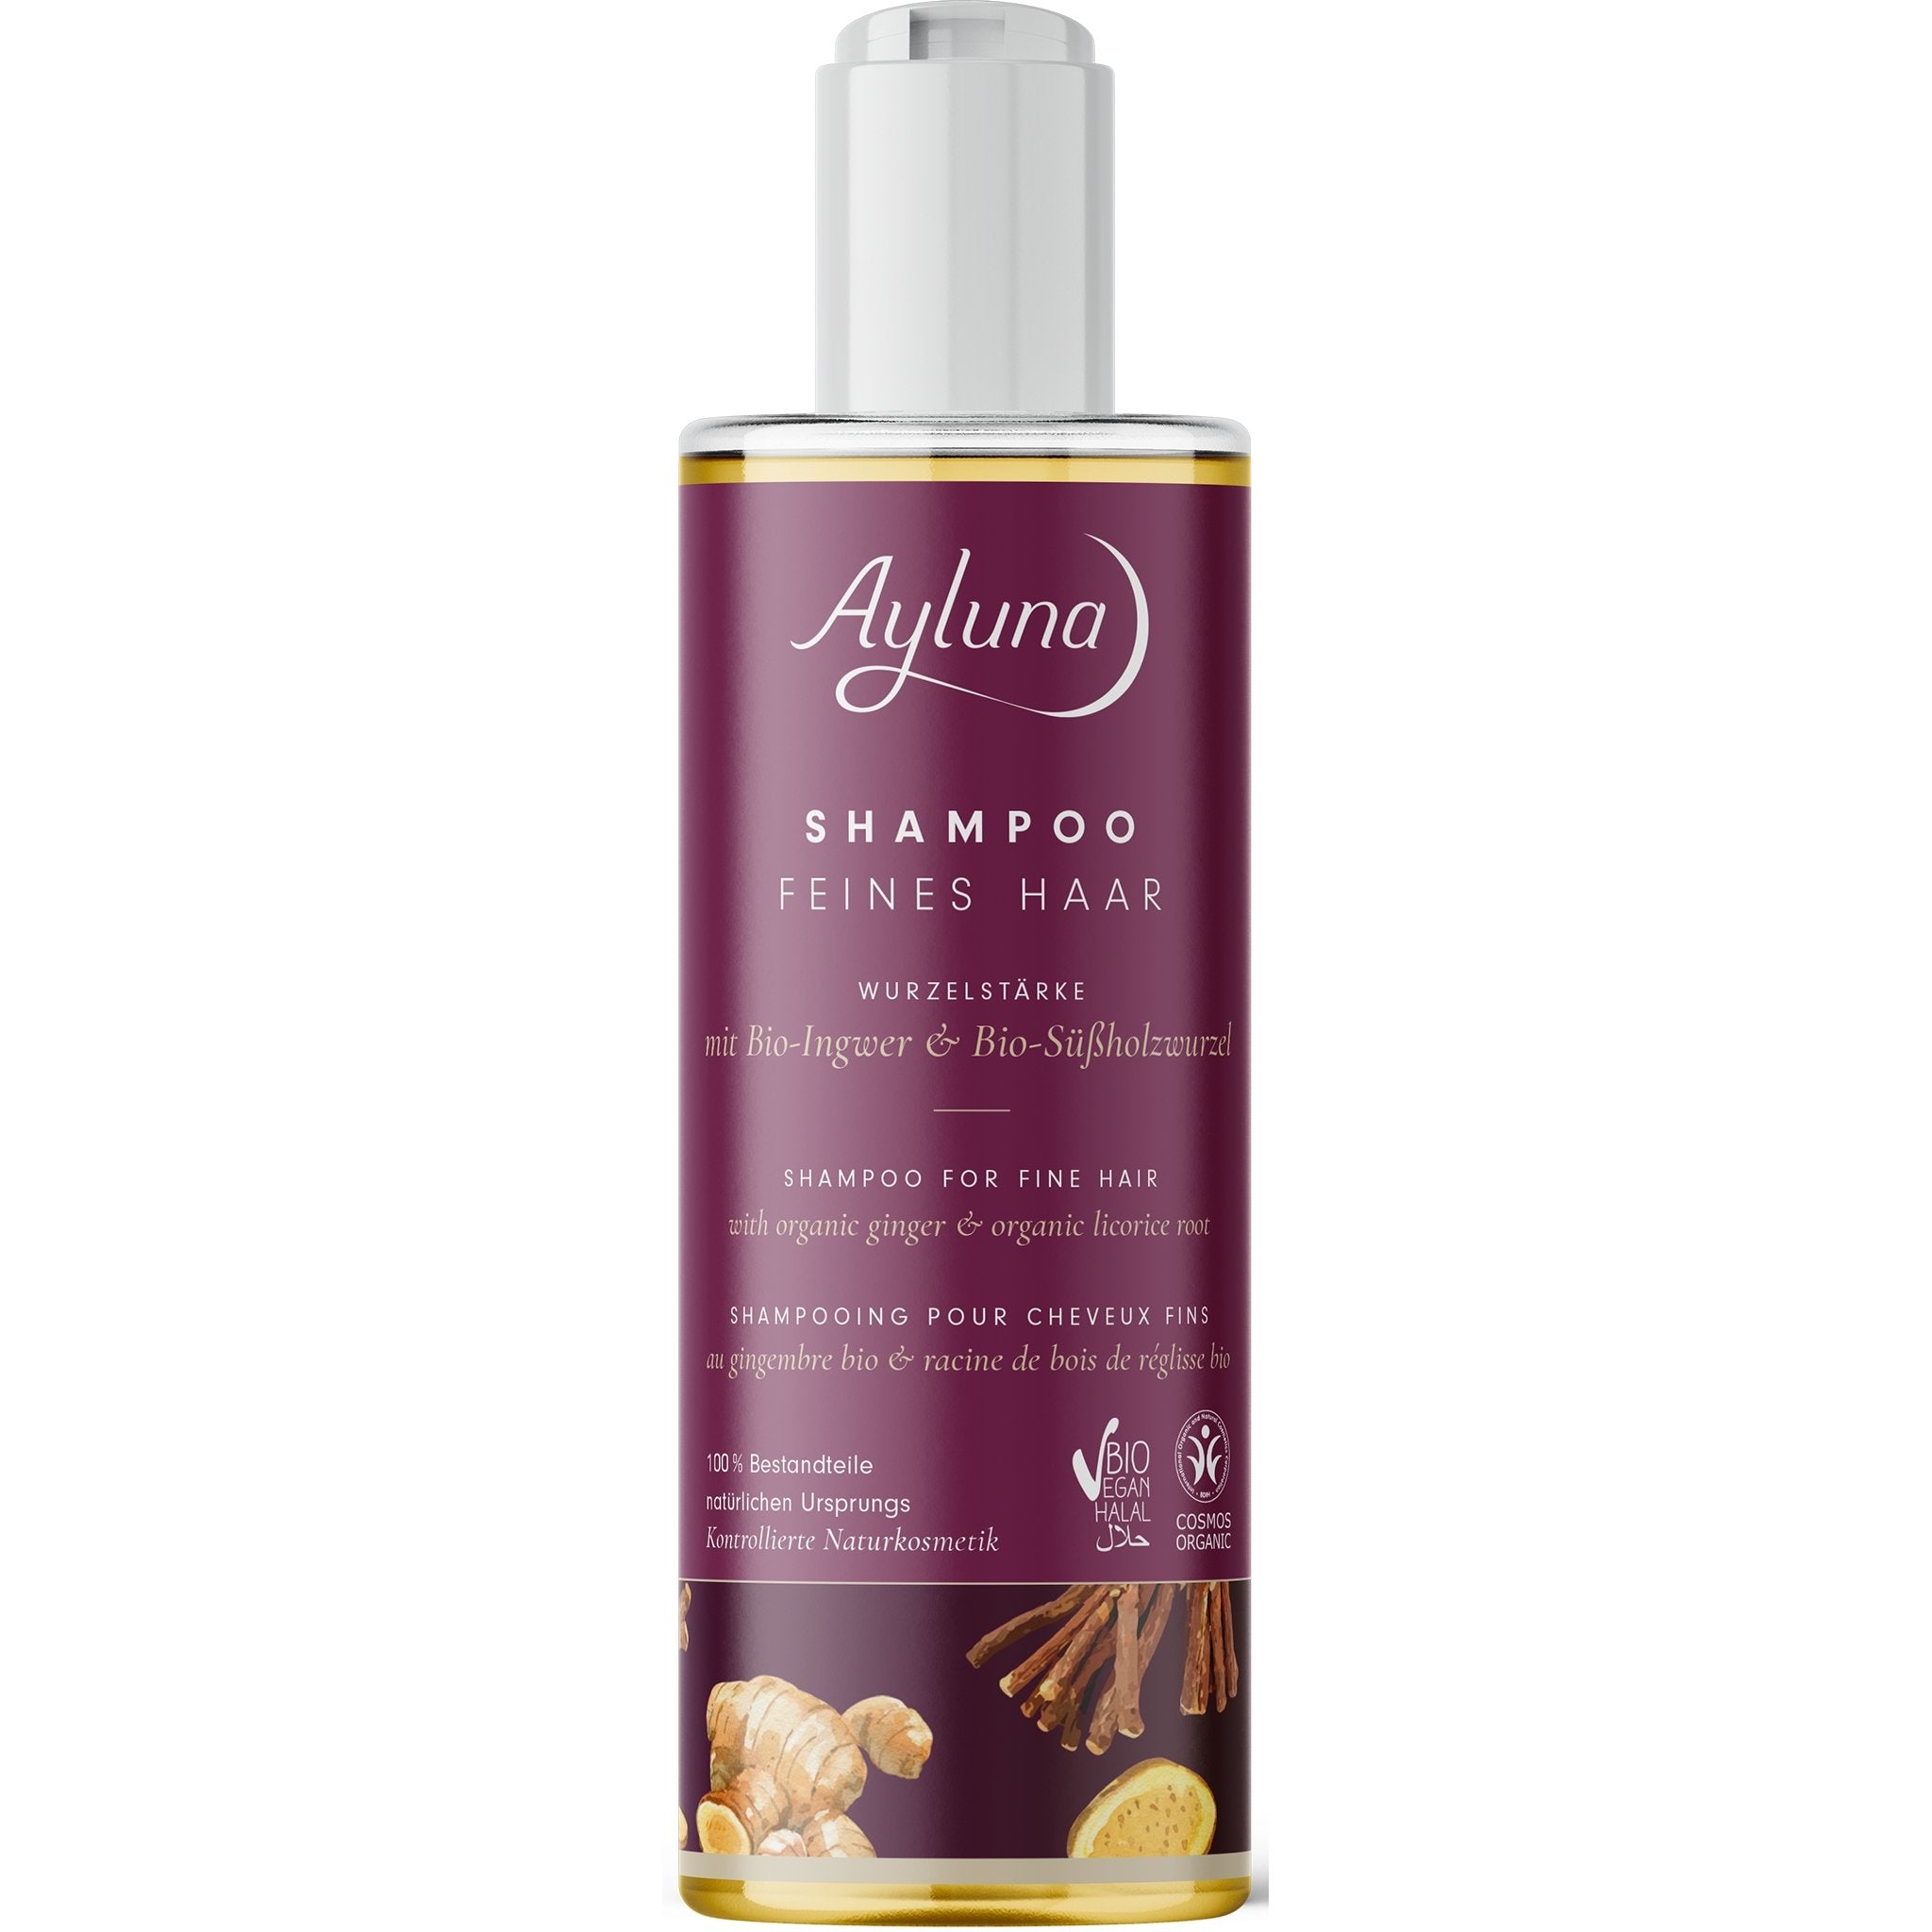 Ginger & Licorice Root Shampoo for Fine Hair - mypure.co.uk